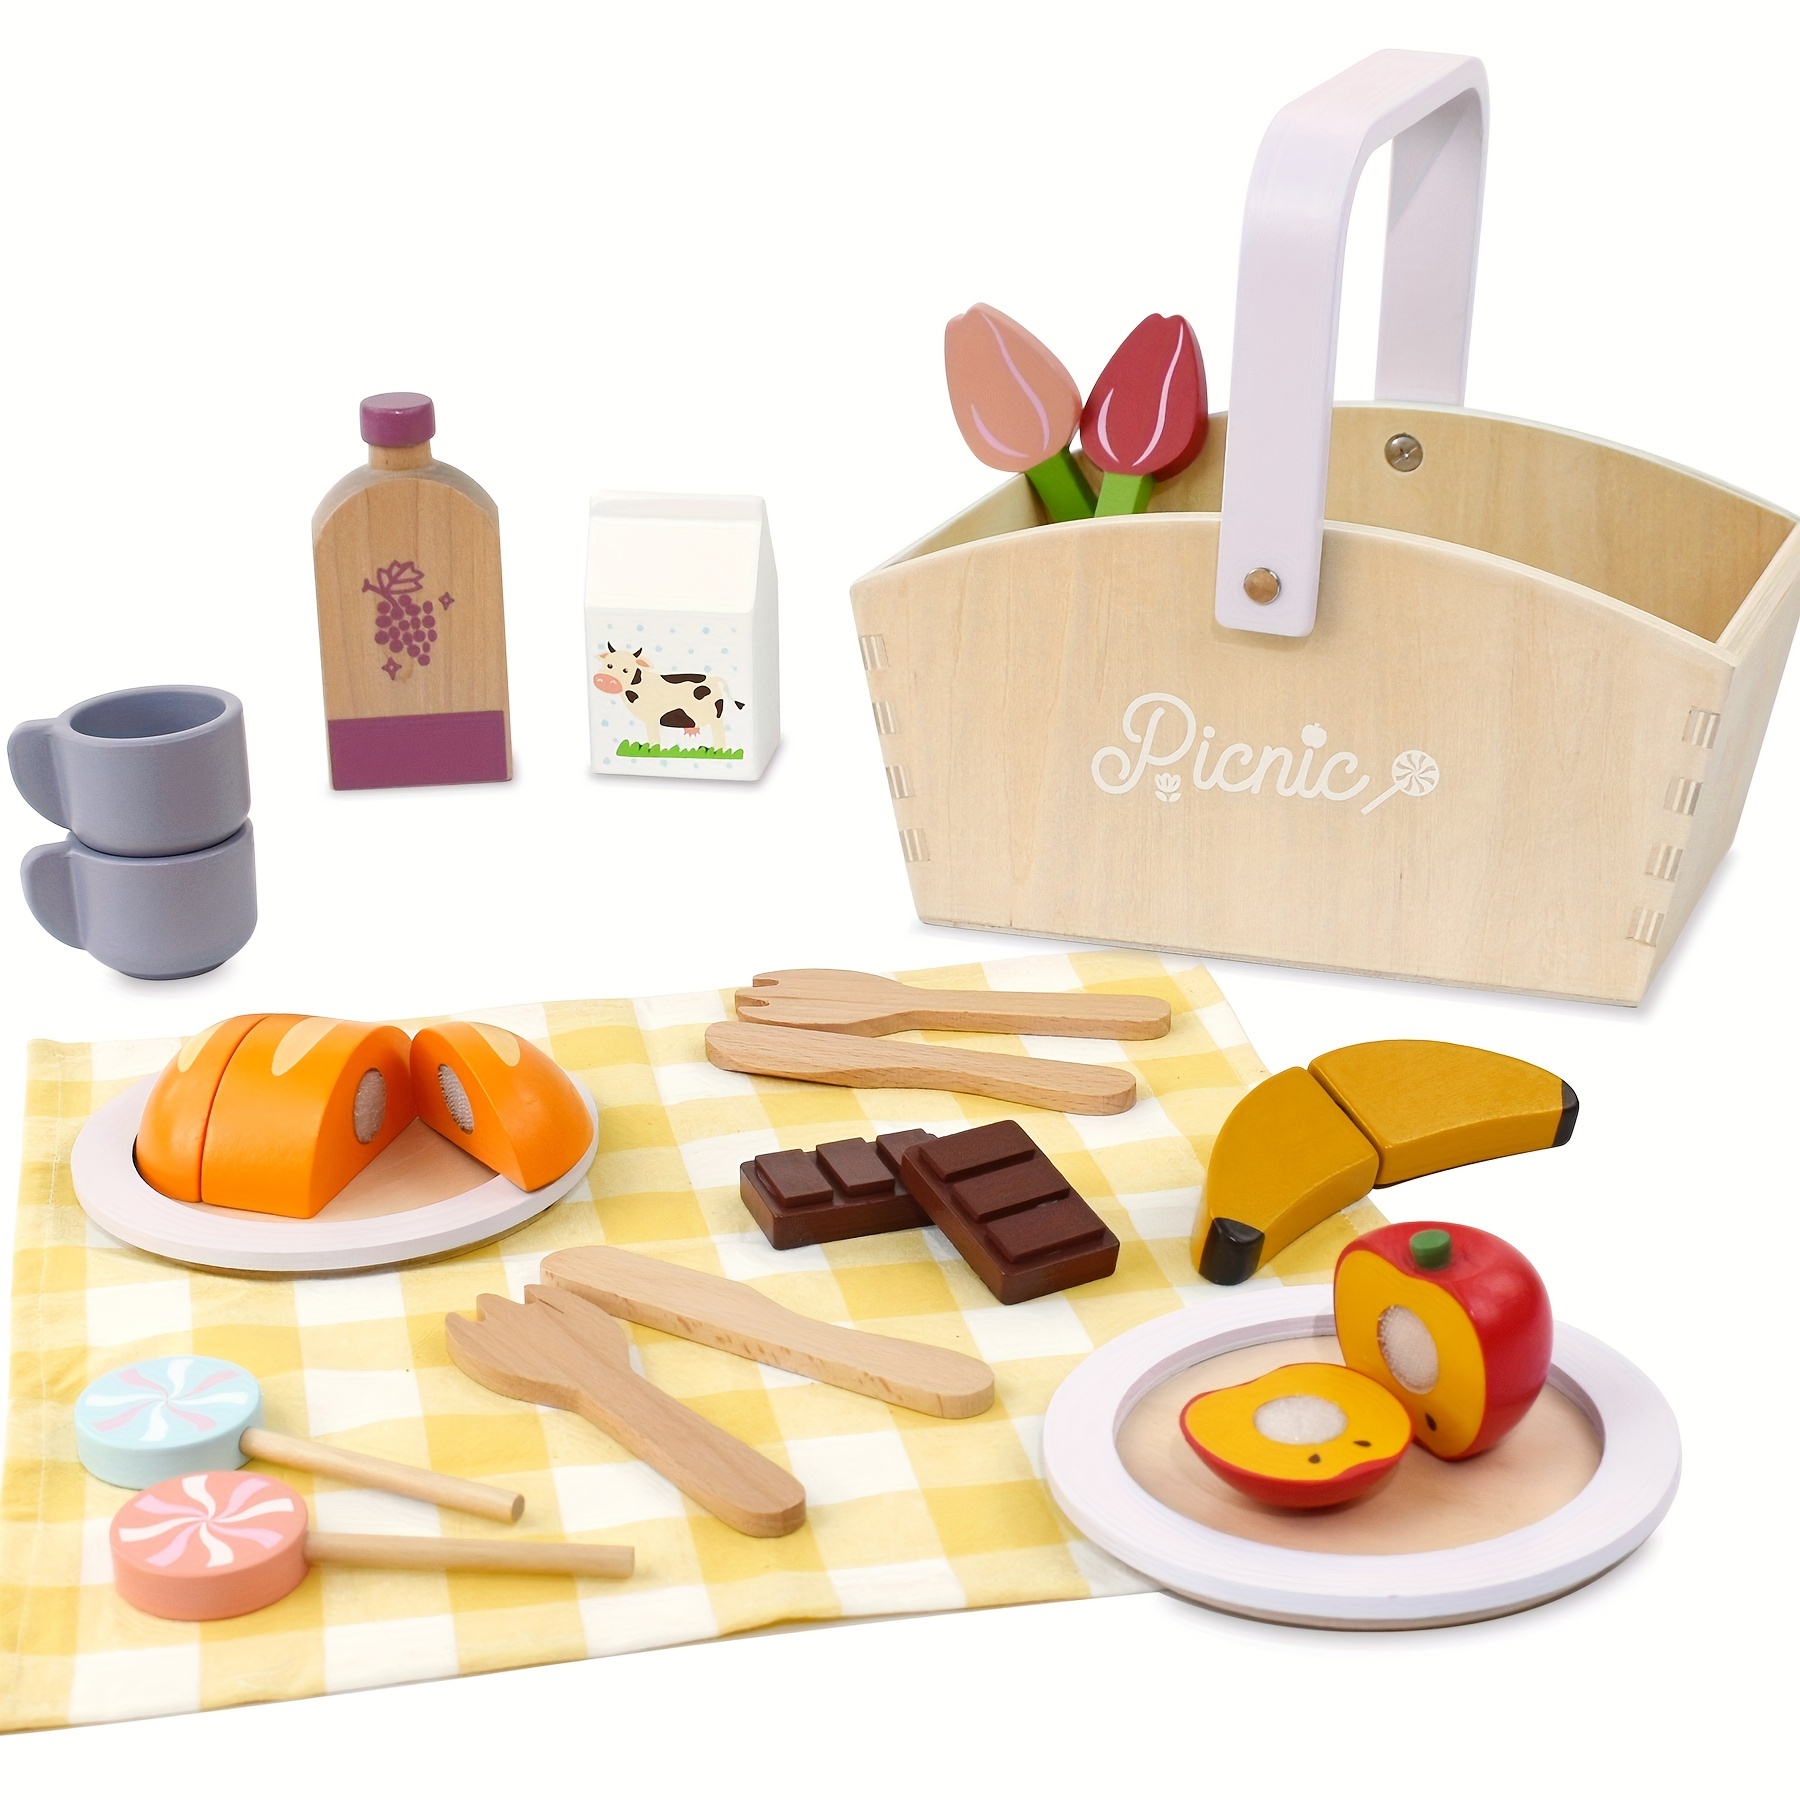 

Wooden Picnic Basket Playset Toy, Pretend Play Food Sharing Playset With Cutting Fruits, Kids Imagination Play For Girls Boys Toddlers 3 Years Old And Up